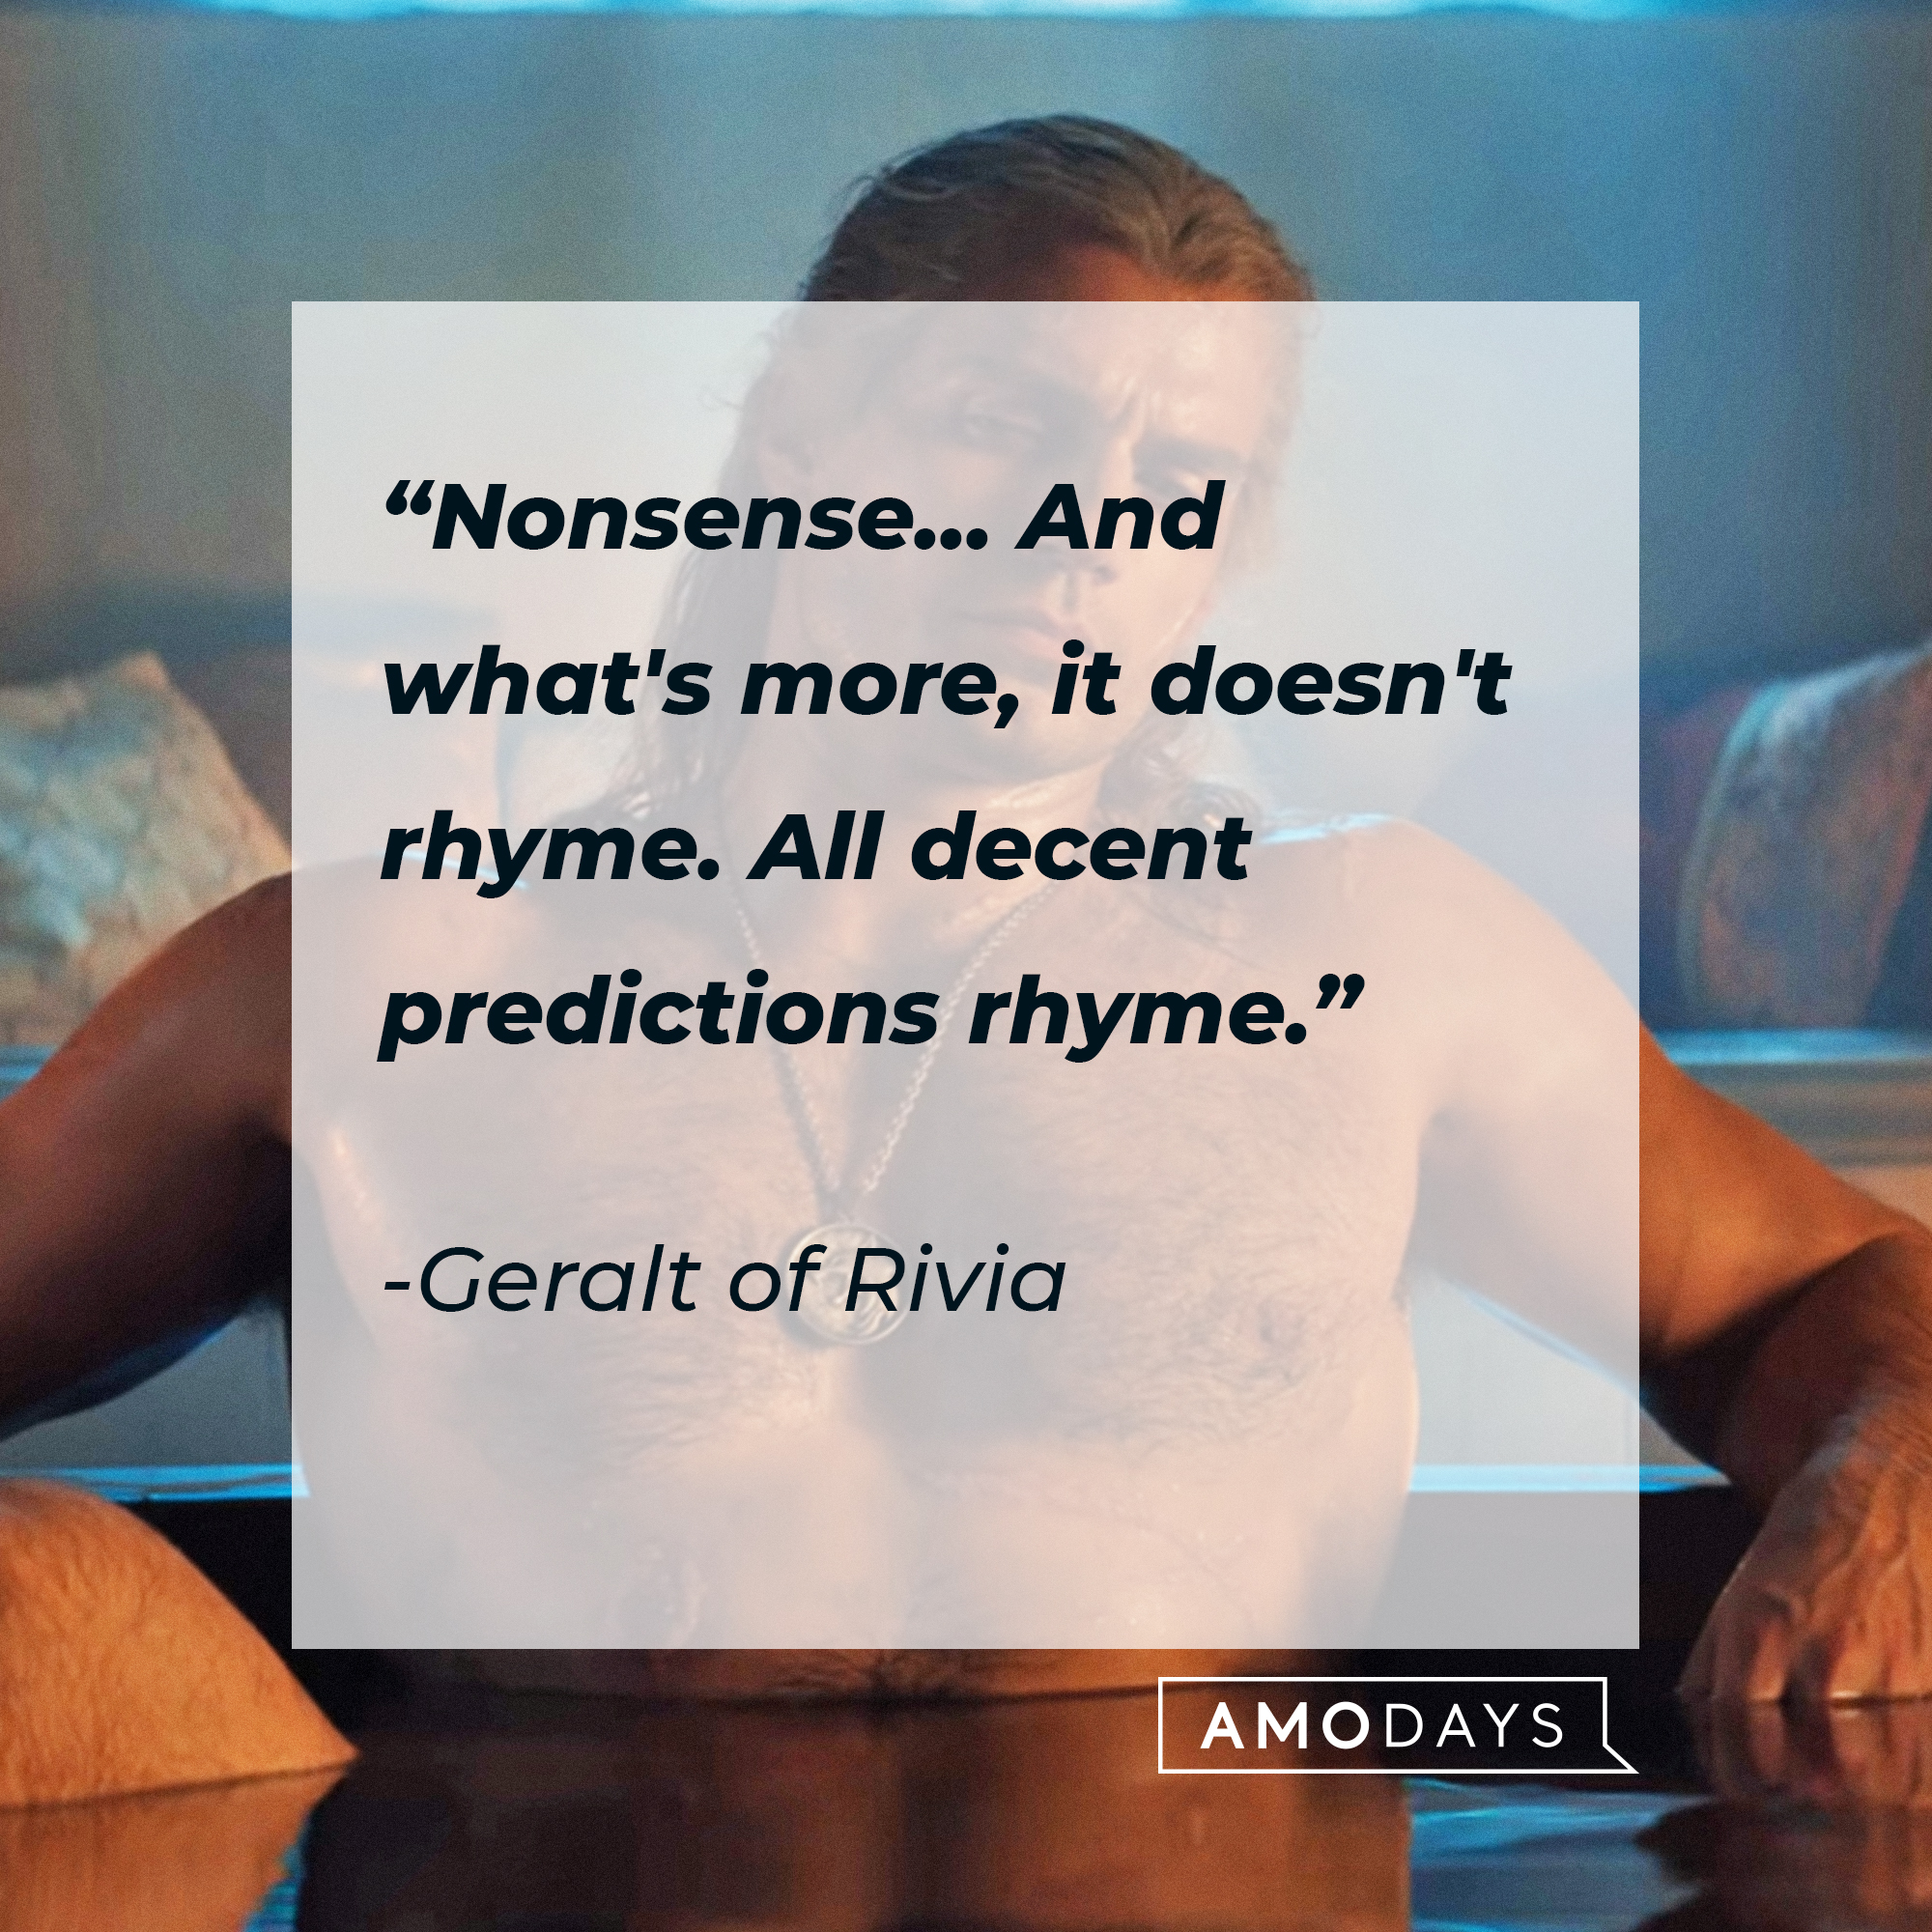 Geralt of Rivia's quote: "Nonsense...And what's more, it doesn't rhyme. All decent predictions rhyme." | Source: YouTube/Netflix